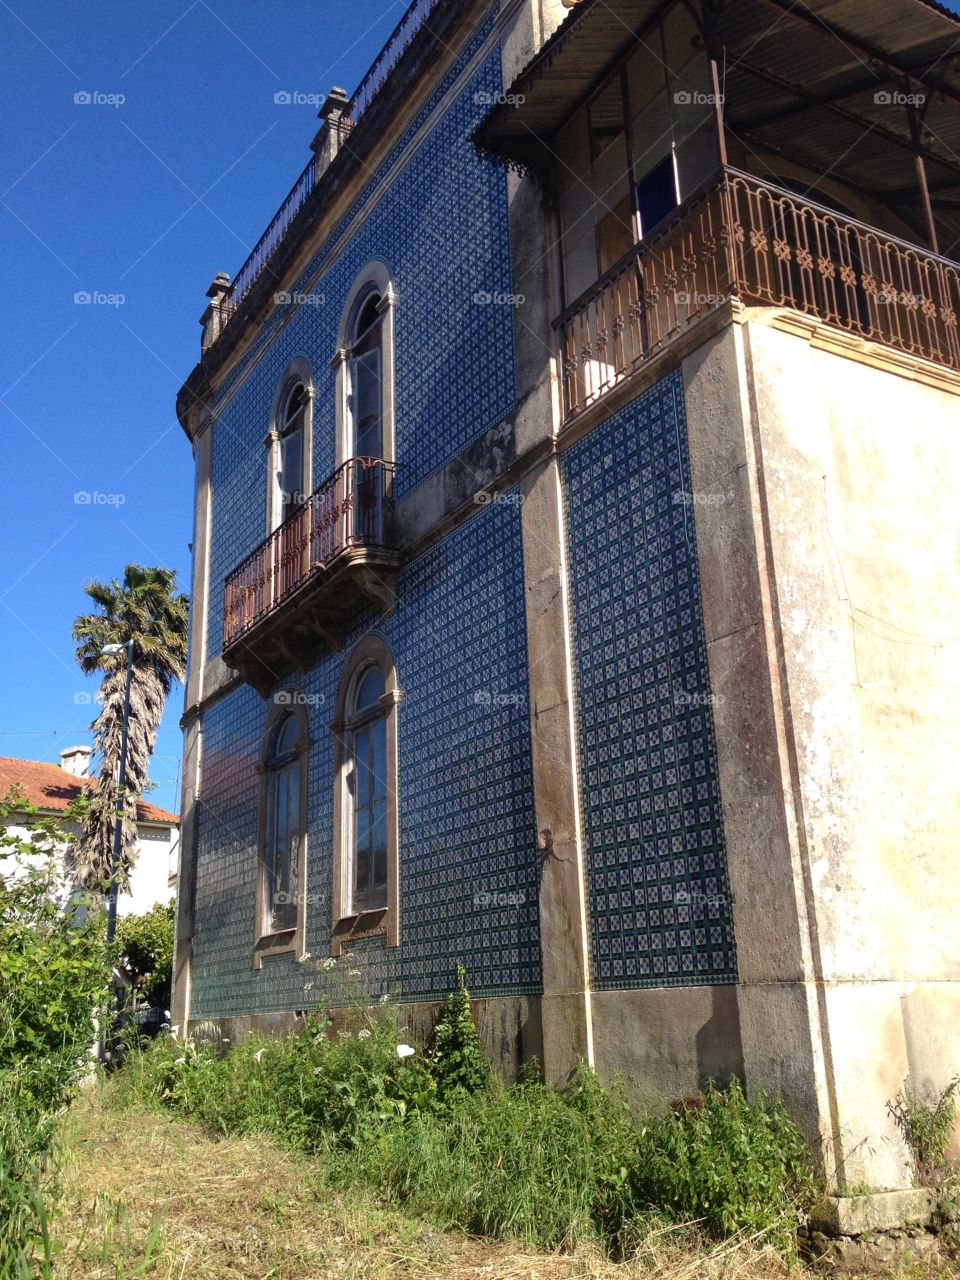 Old building with tiles